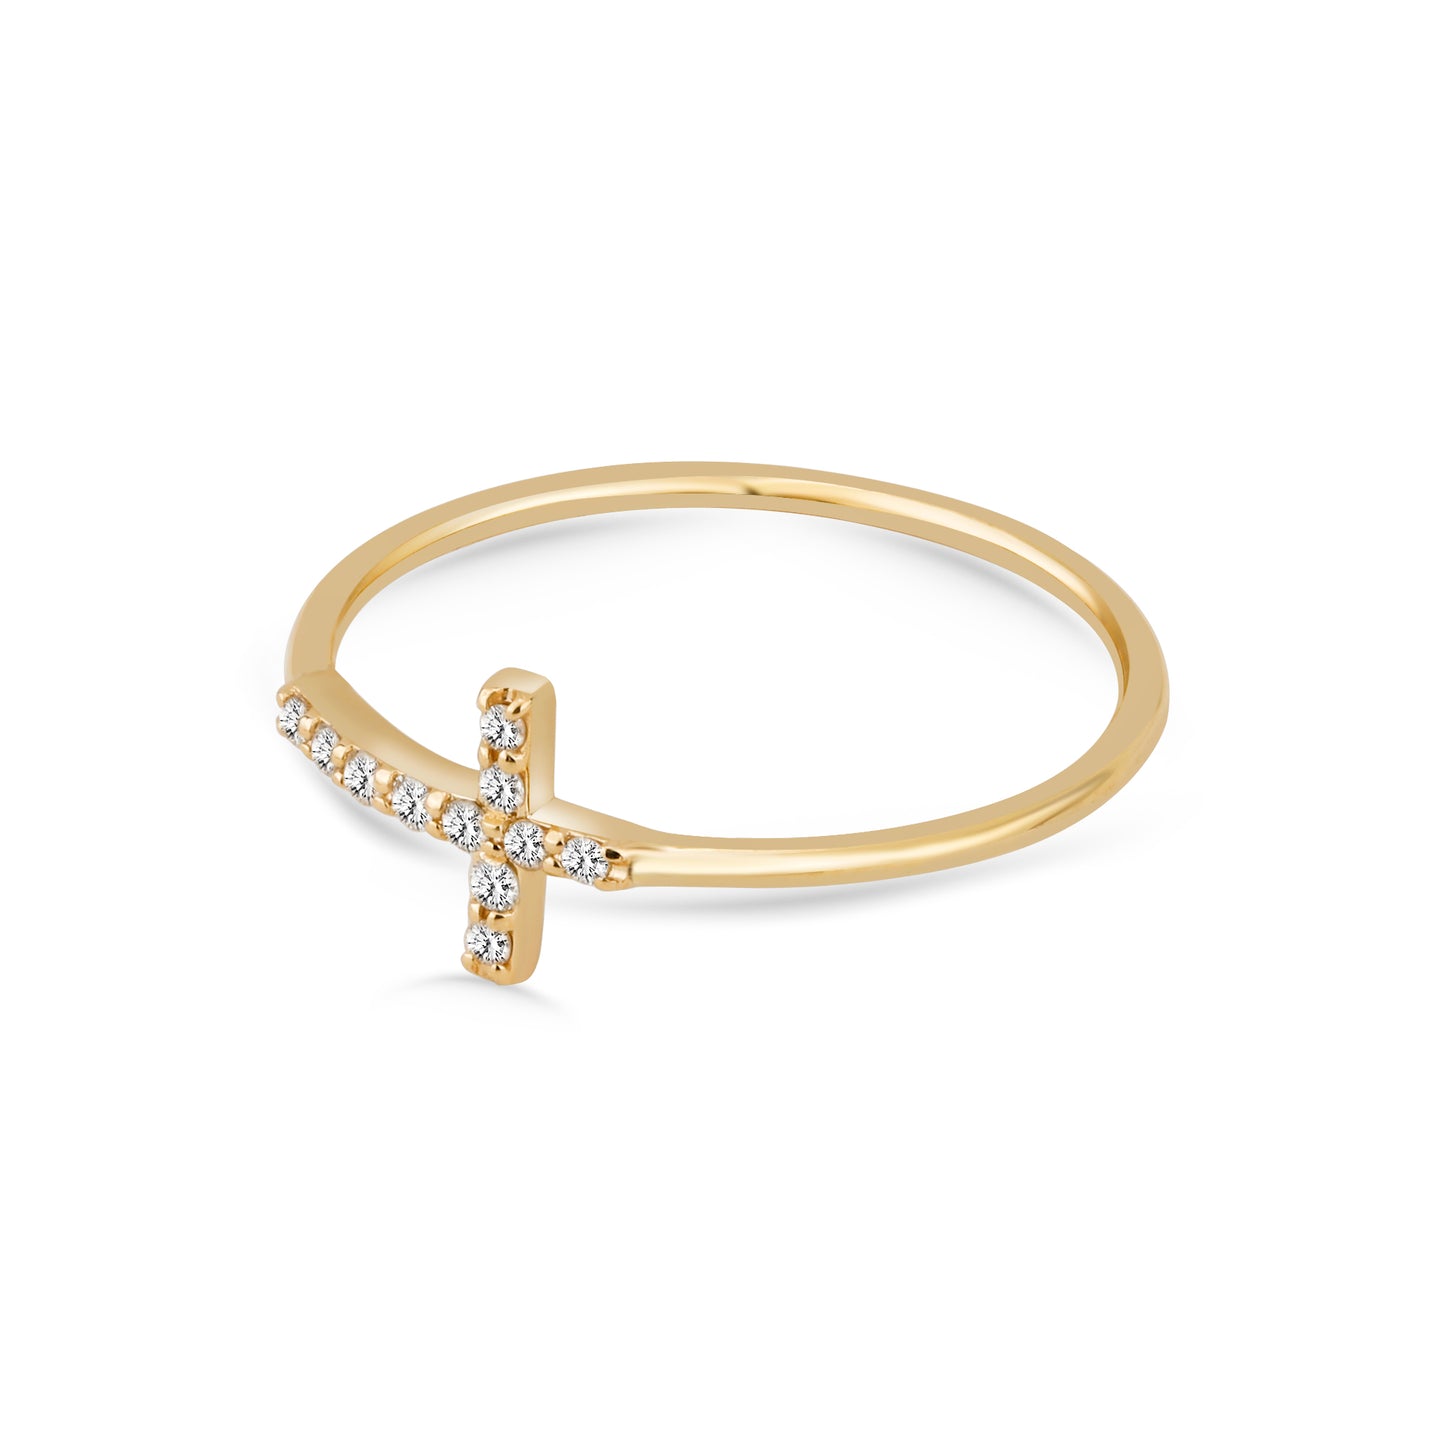 14k Gold Diamond Cross Ring, Diamond Christian Ring, Crucifix Ring, Religious Ring, Gold Stacking Ring, Valentine's Day Gift, Gift For Her